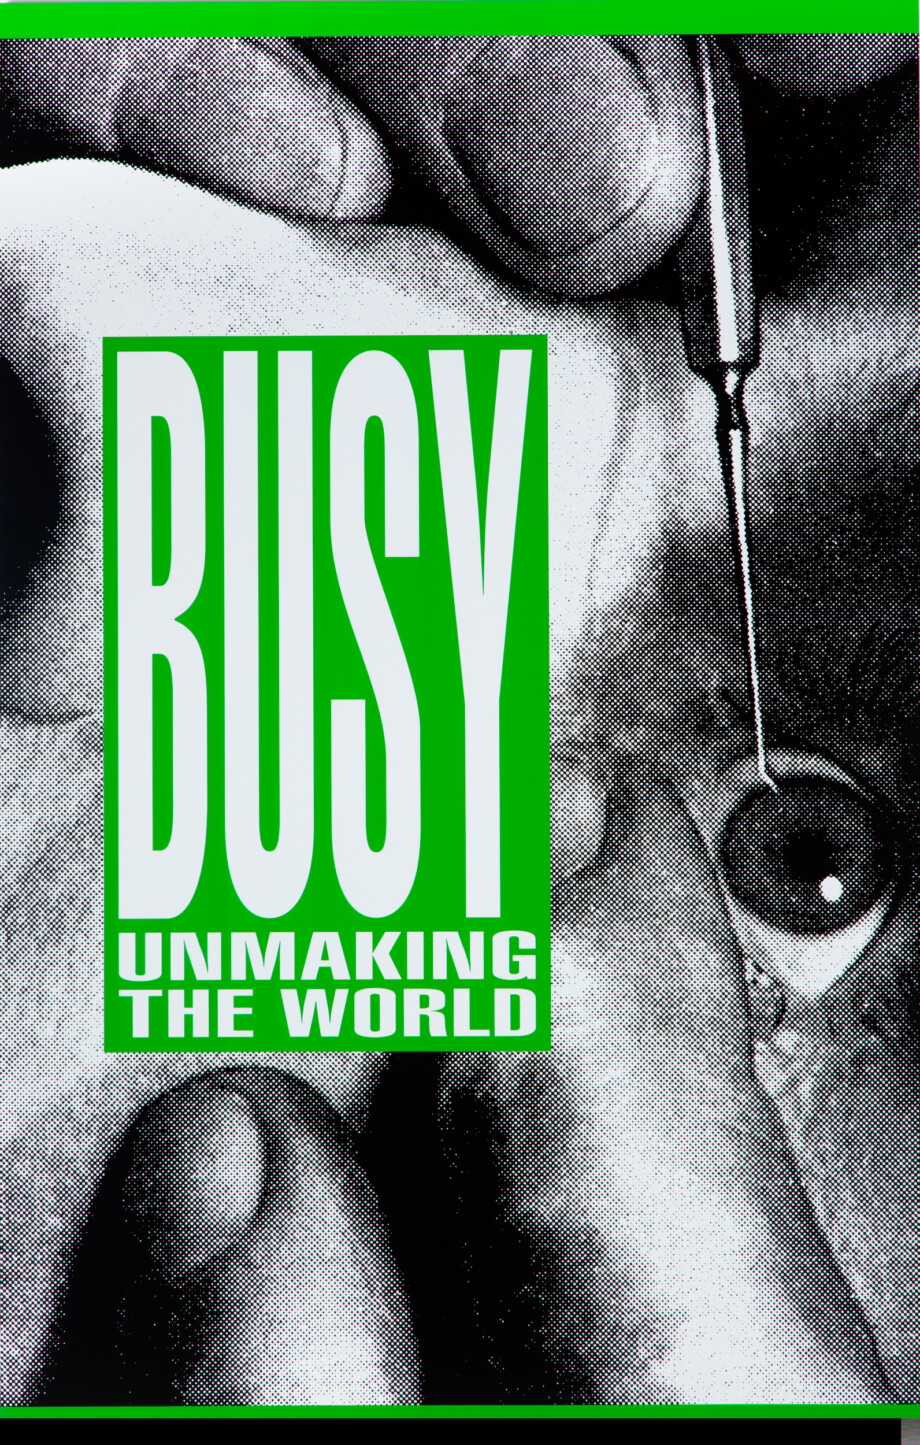 Untitled (Busy unmaking the world) by Barbara KRUGER, 2015, part of How To Say It The Way It Is.